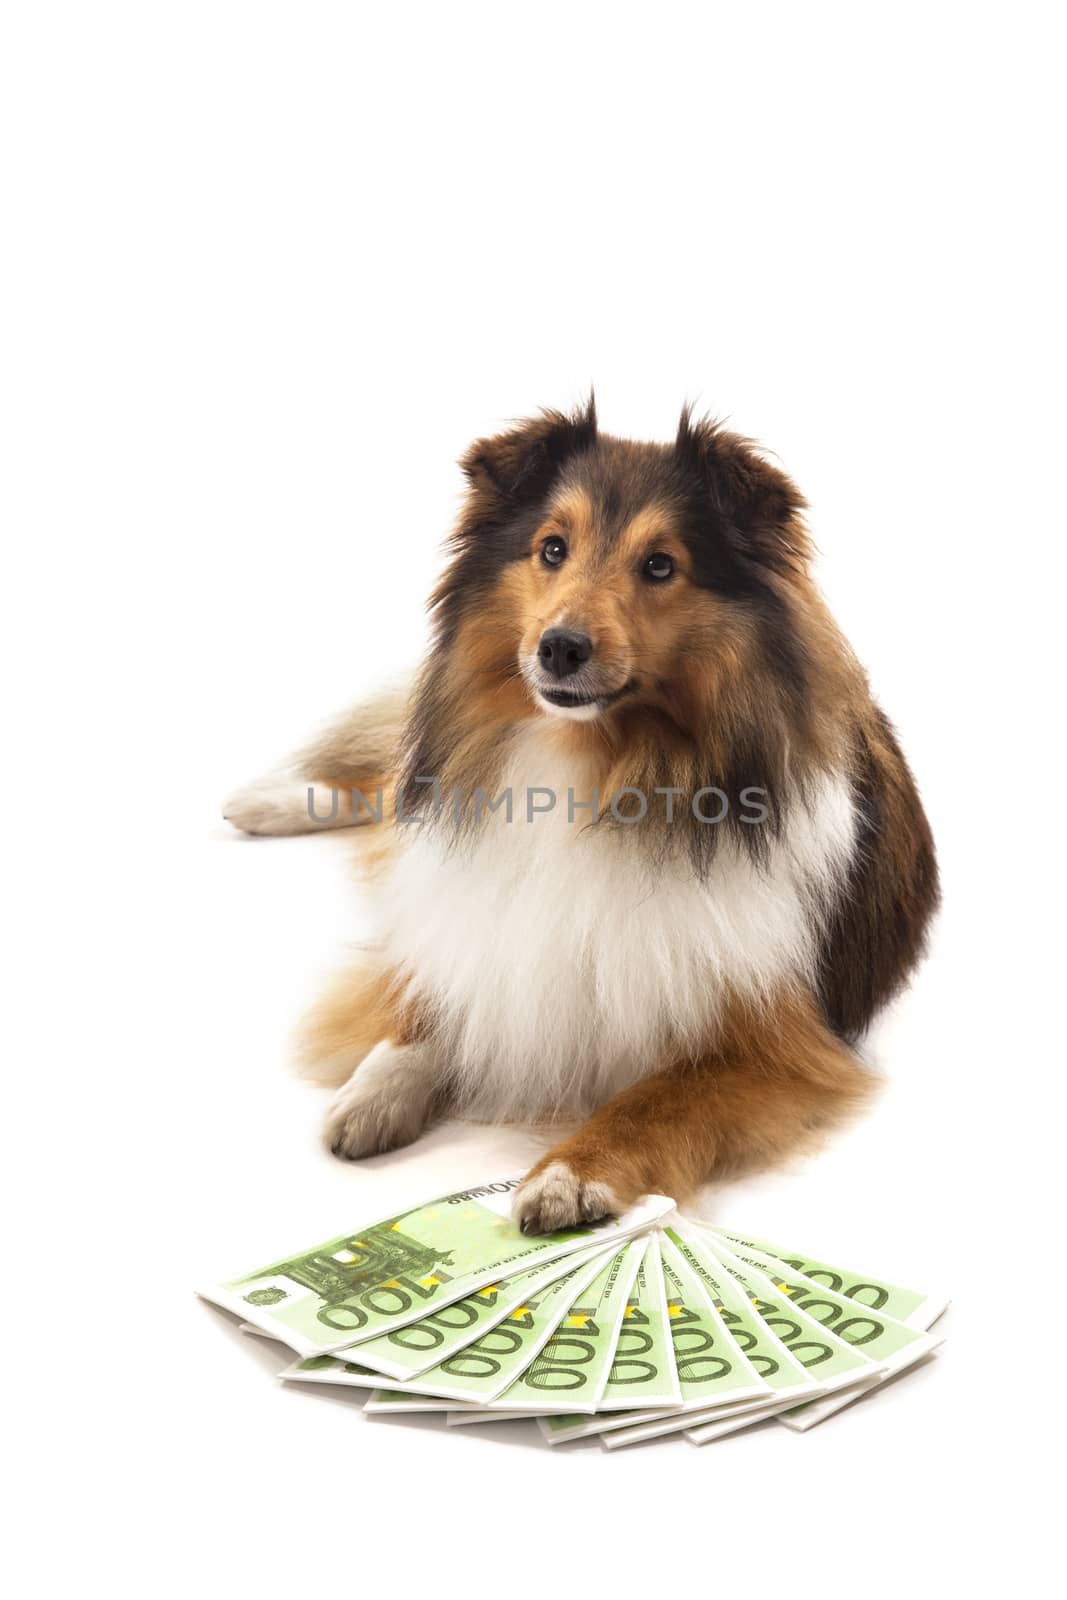 Portrait of Shetland sheepdog in front of euro banknote over white background